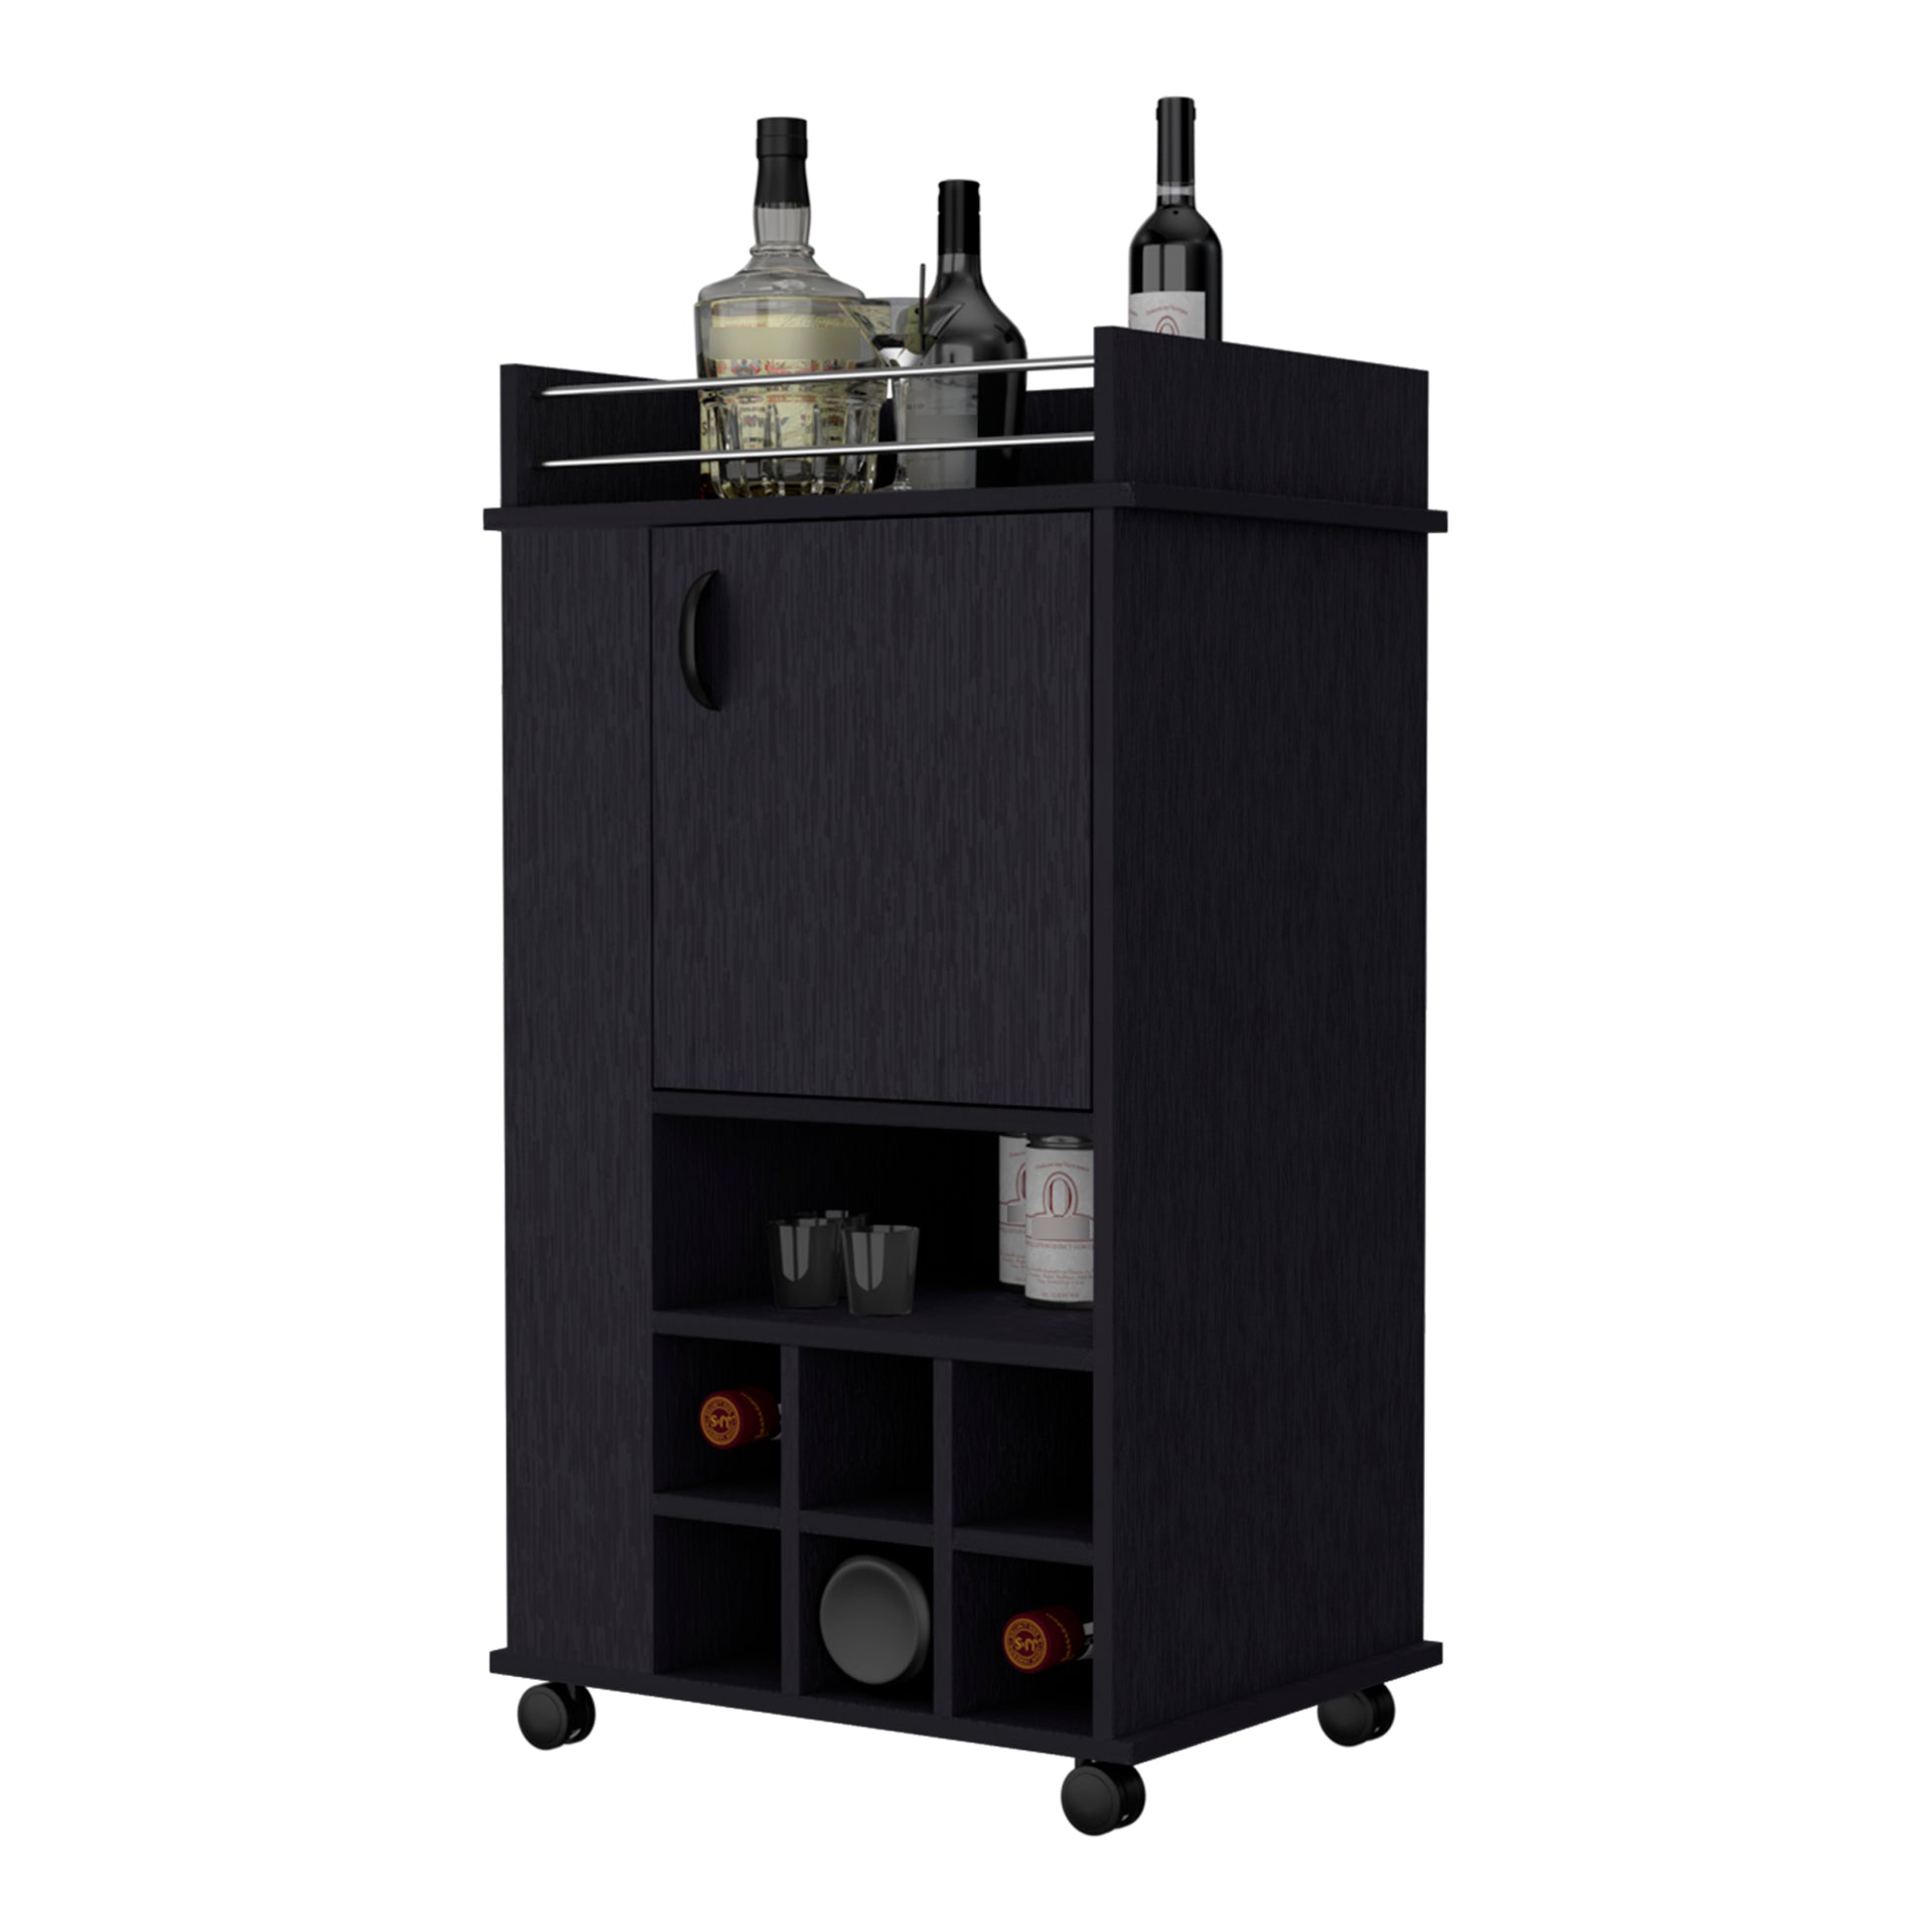 Farson Bar Cart with 2 Side Shelf, 6 Built In Wine freestanding-5 or more